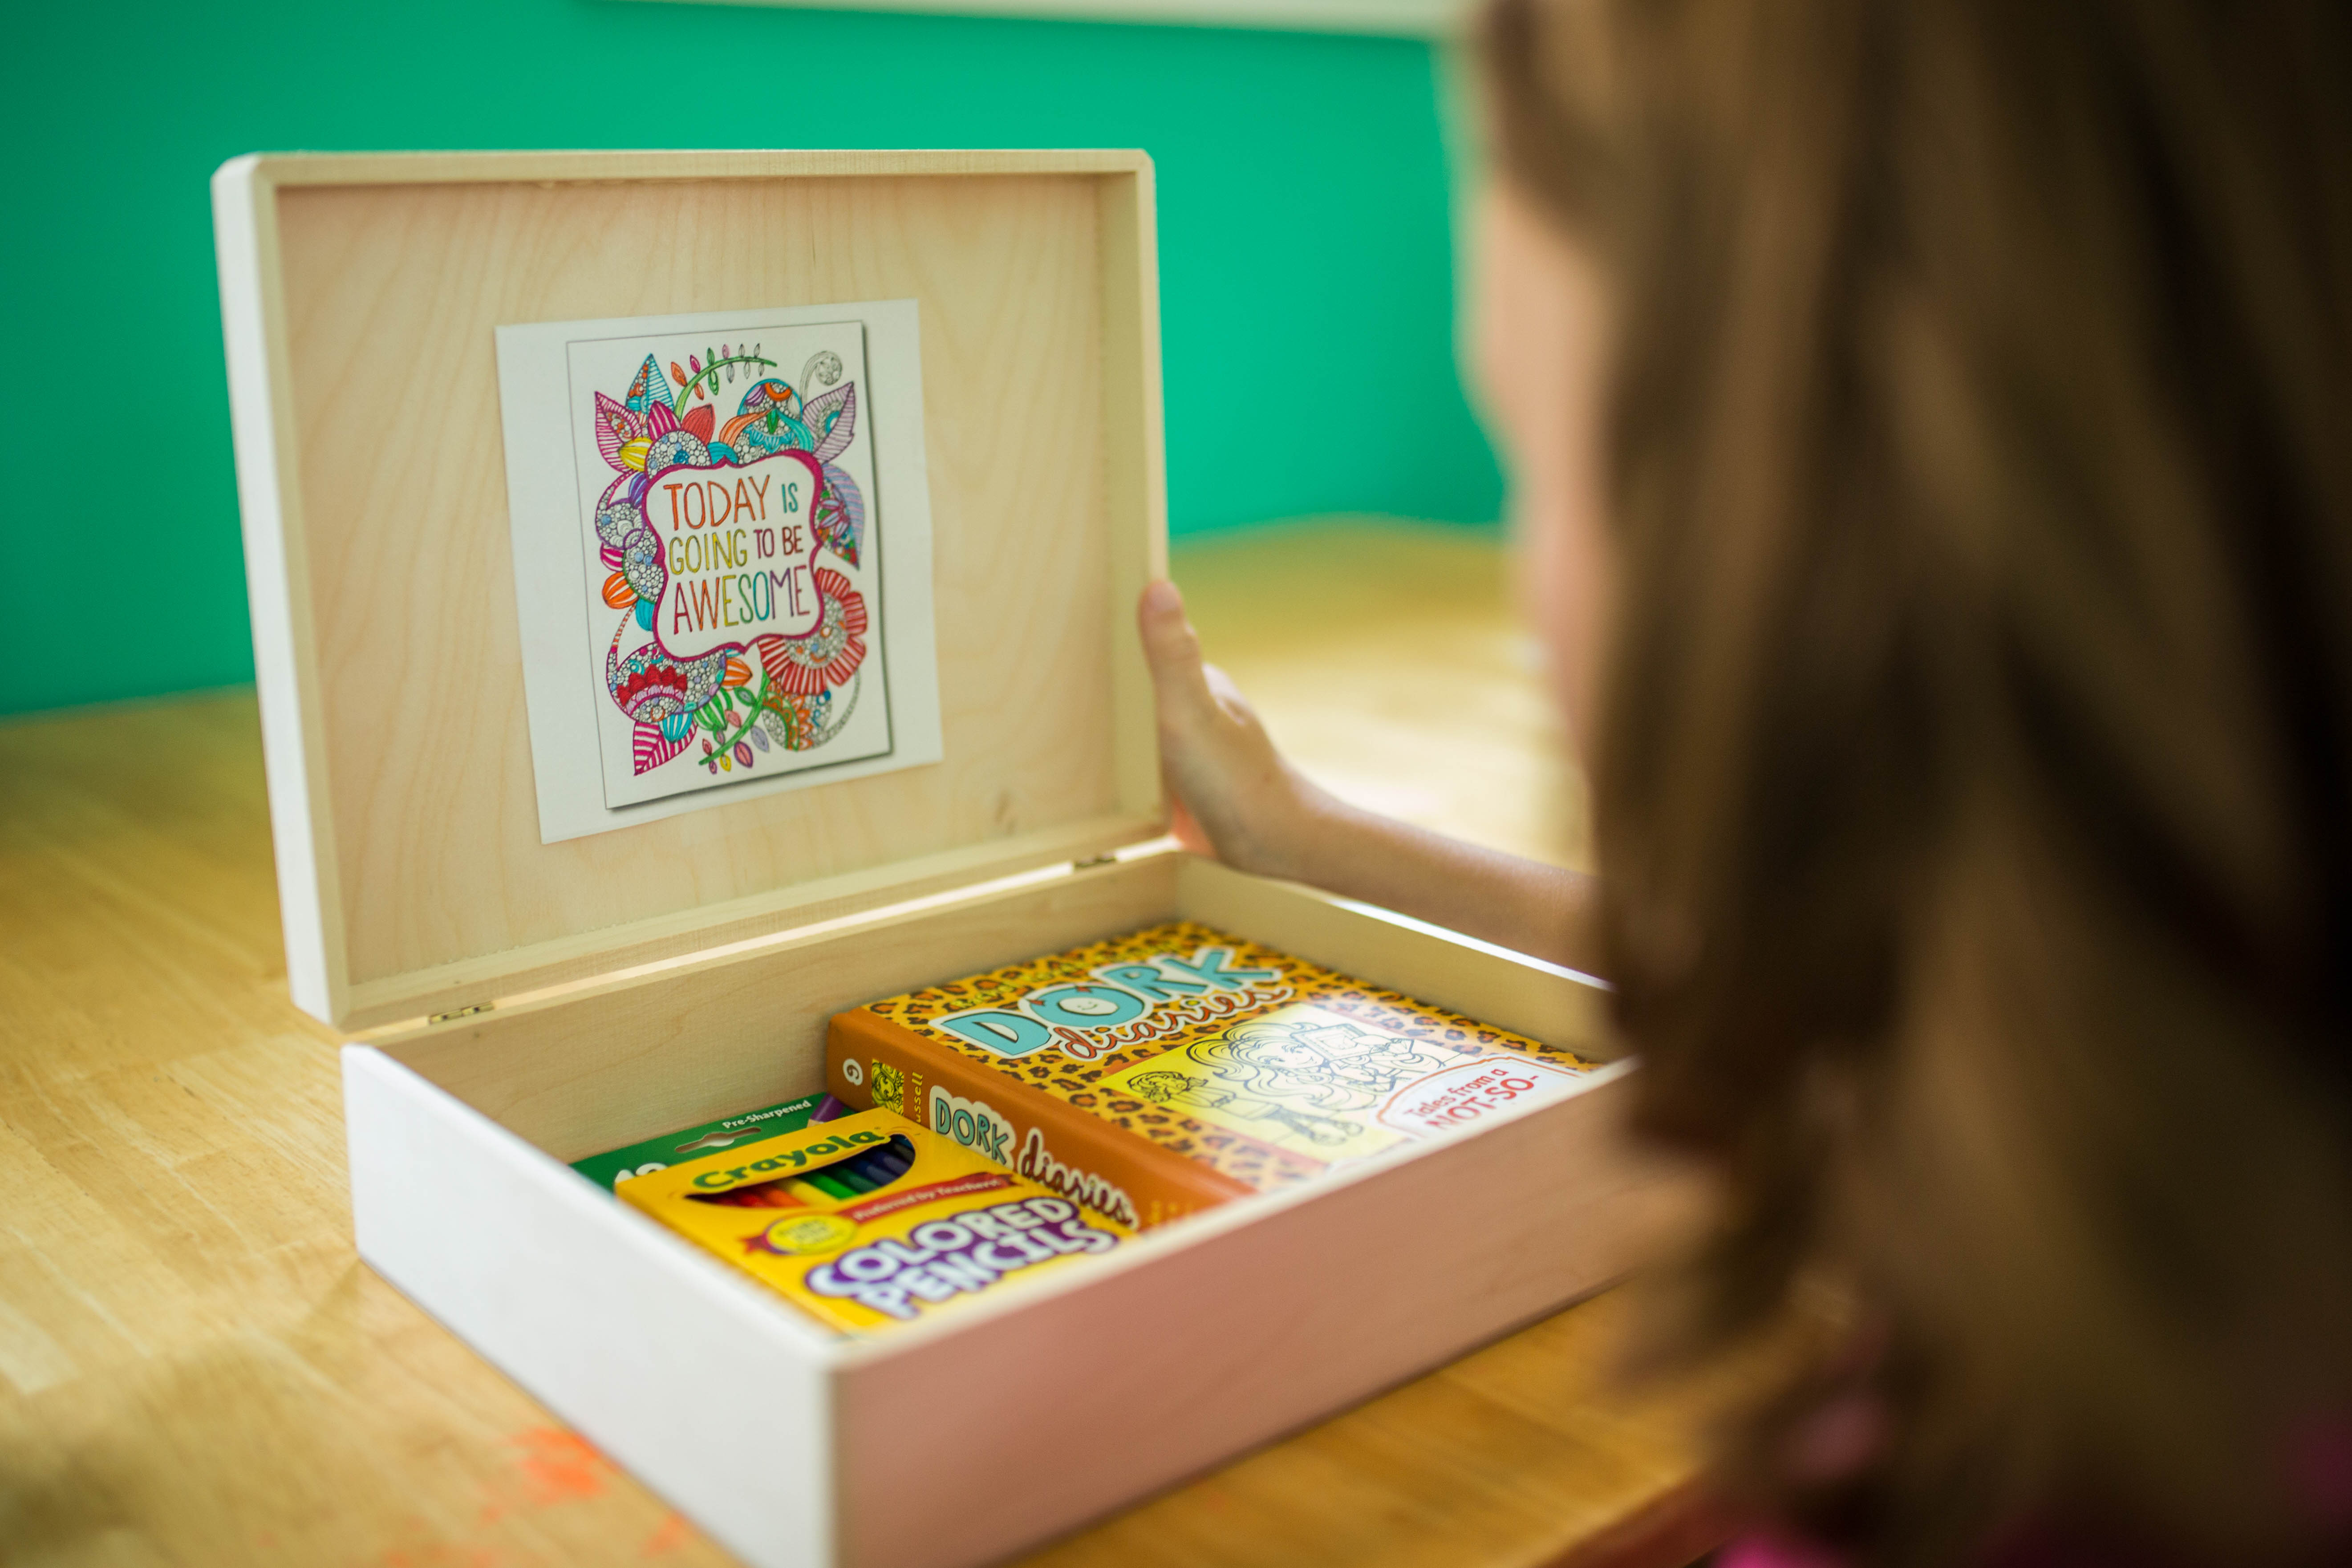 Kayla's coping box contains items like colouring pencils and books 